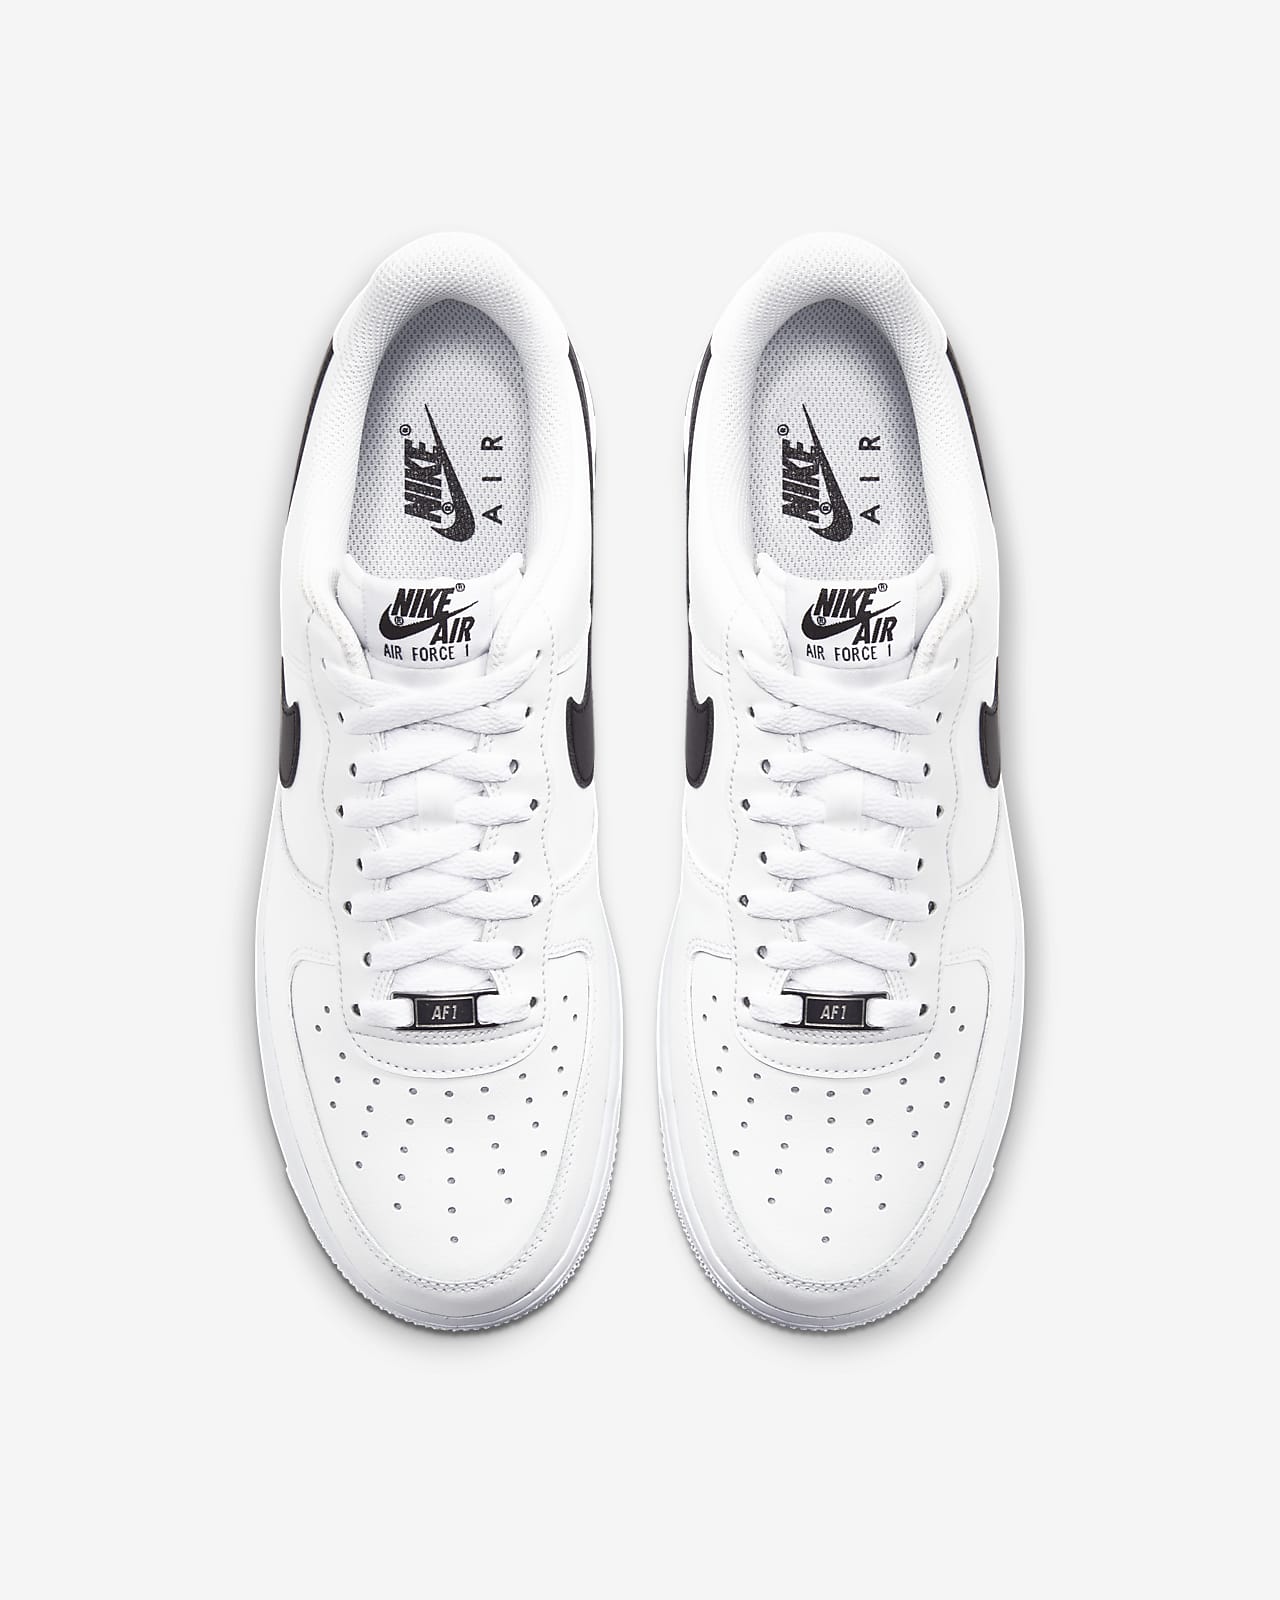 white and black airforces